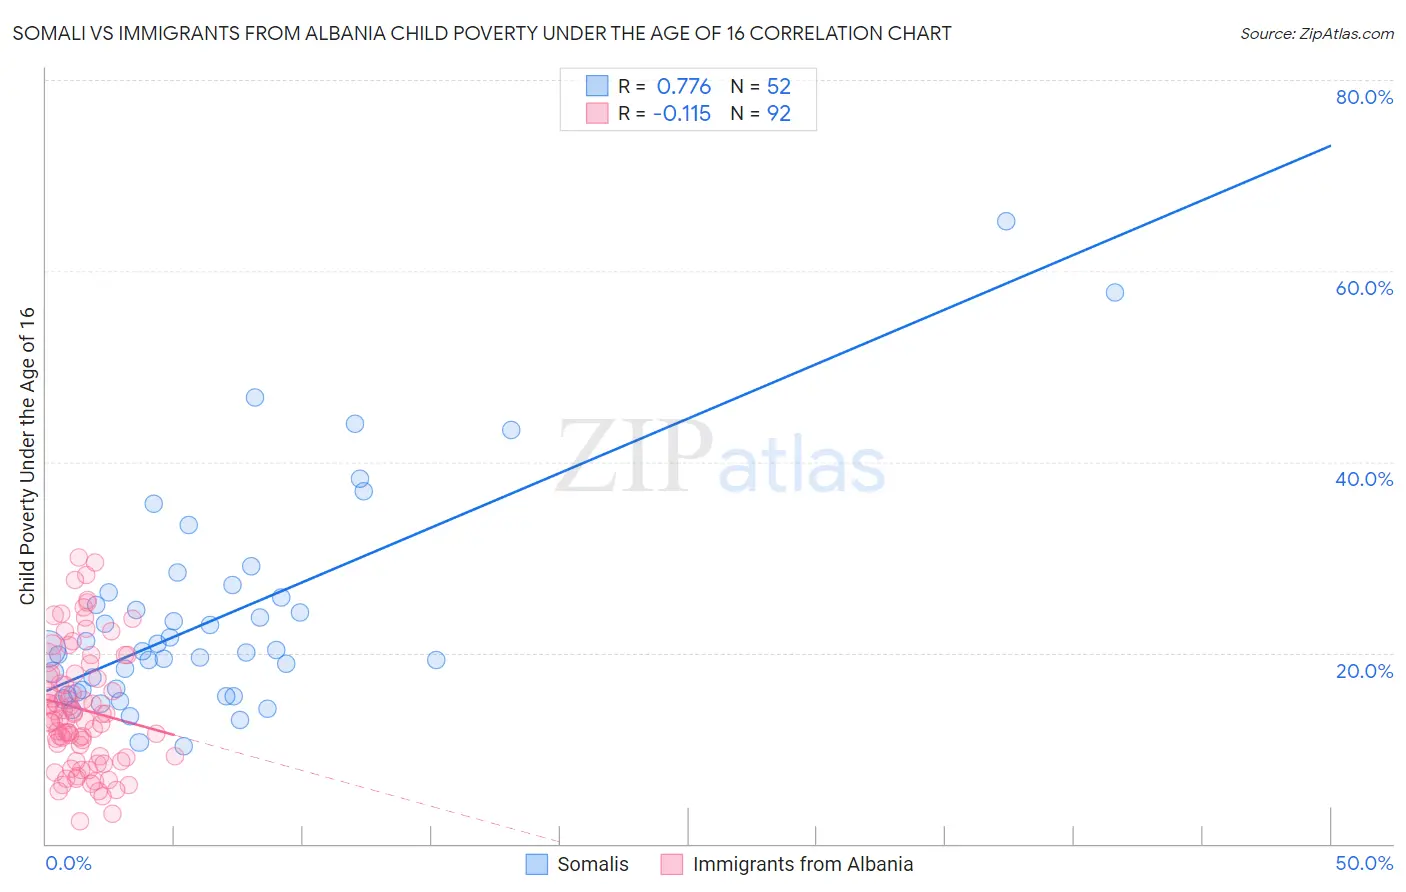 Somali vs Immigrants from Albania Child Poverty Under the Age of 16